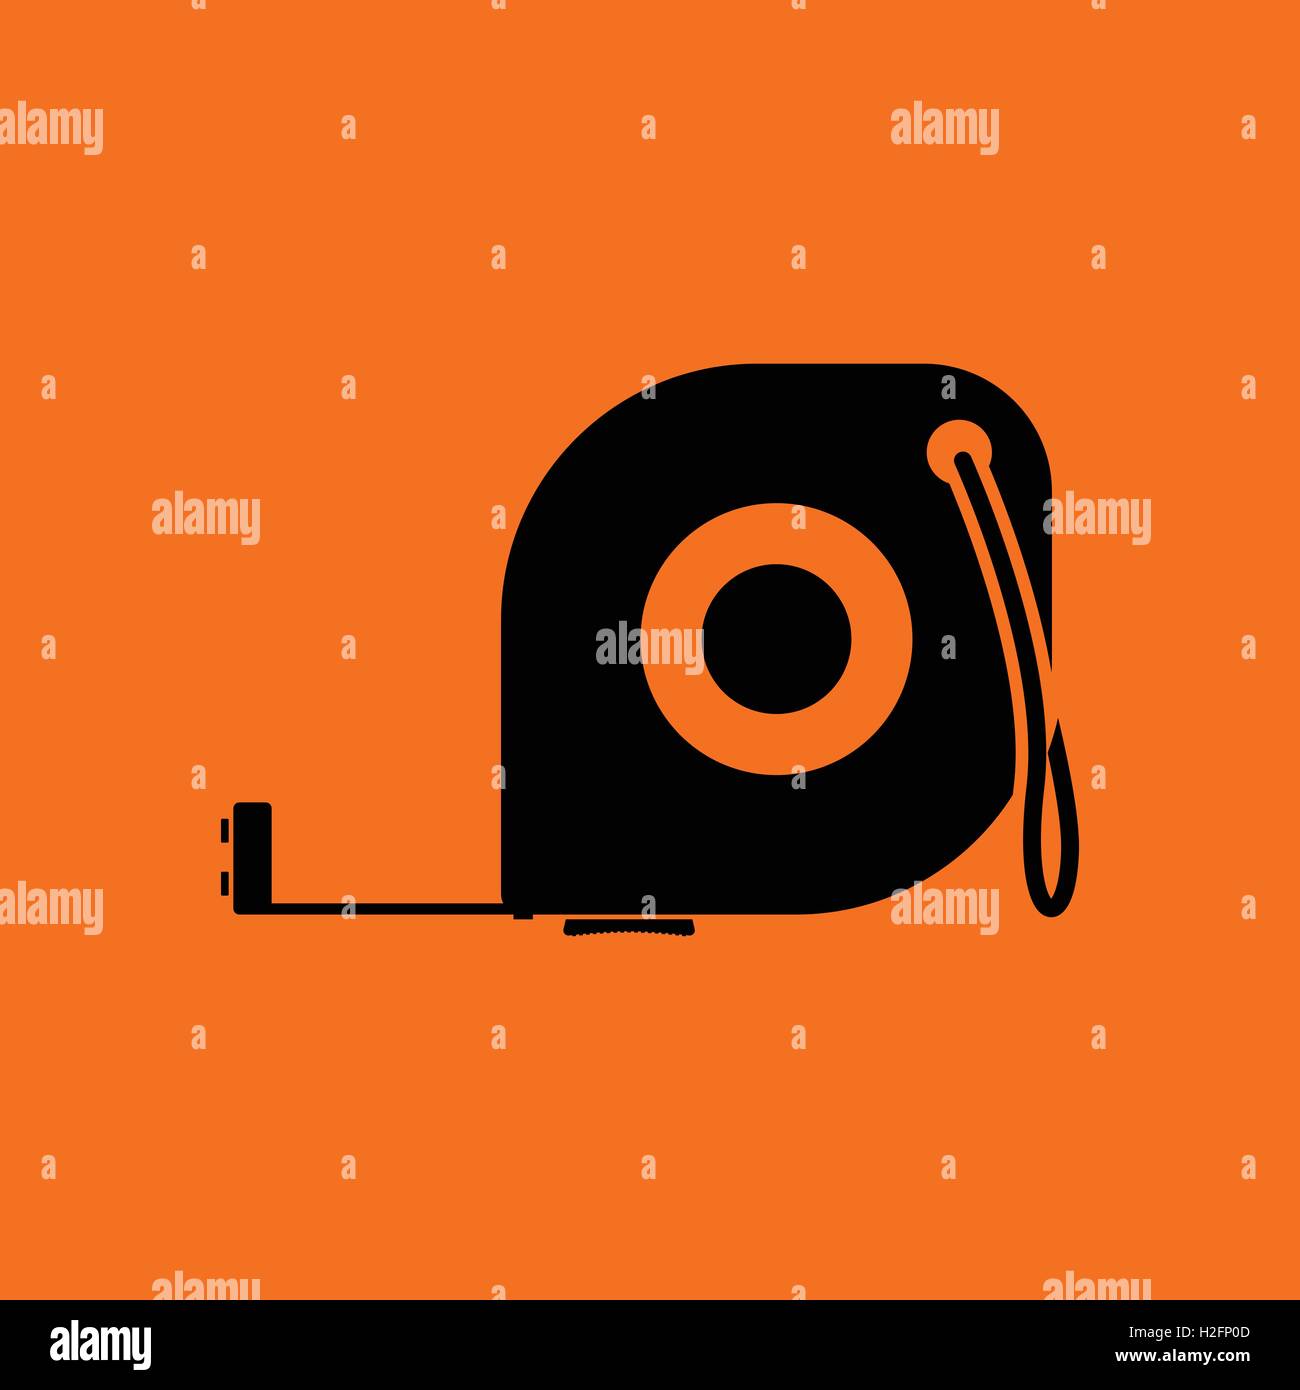 Icon of constriction tape measure. Orange background with black. Vector illustration. Stock Vector